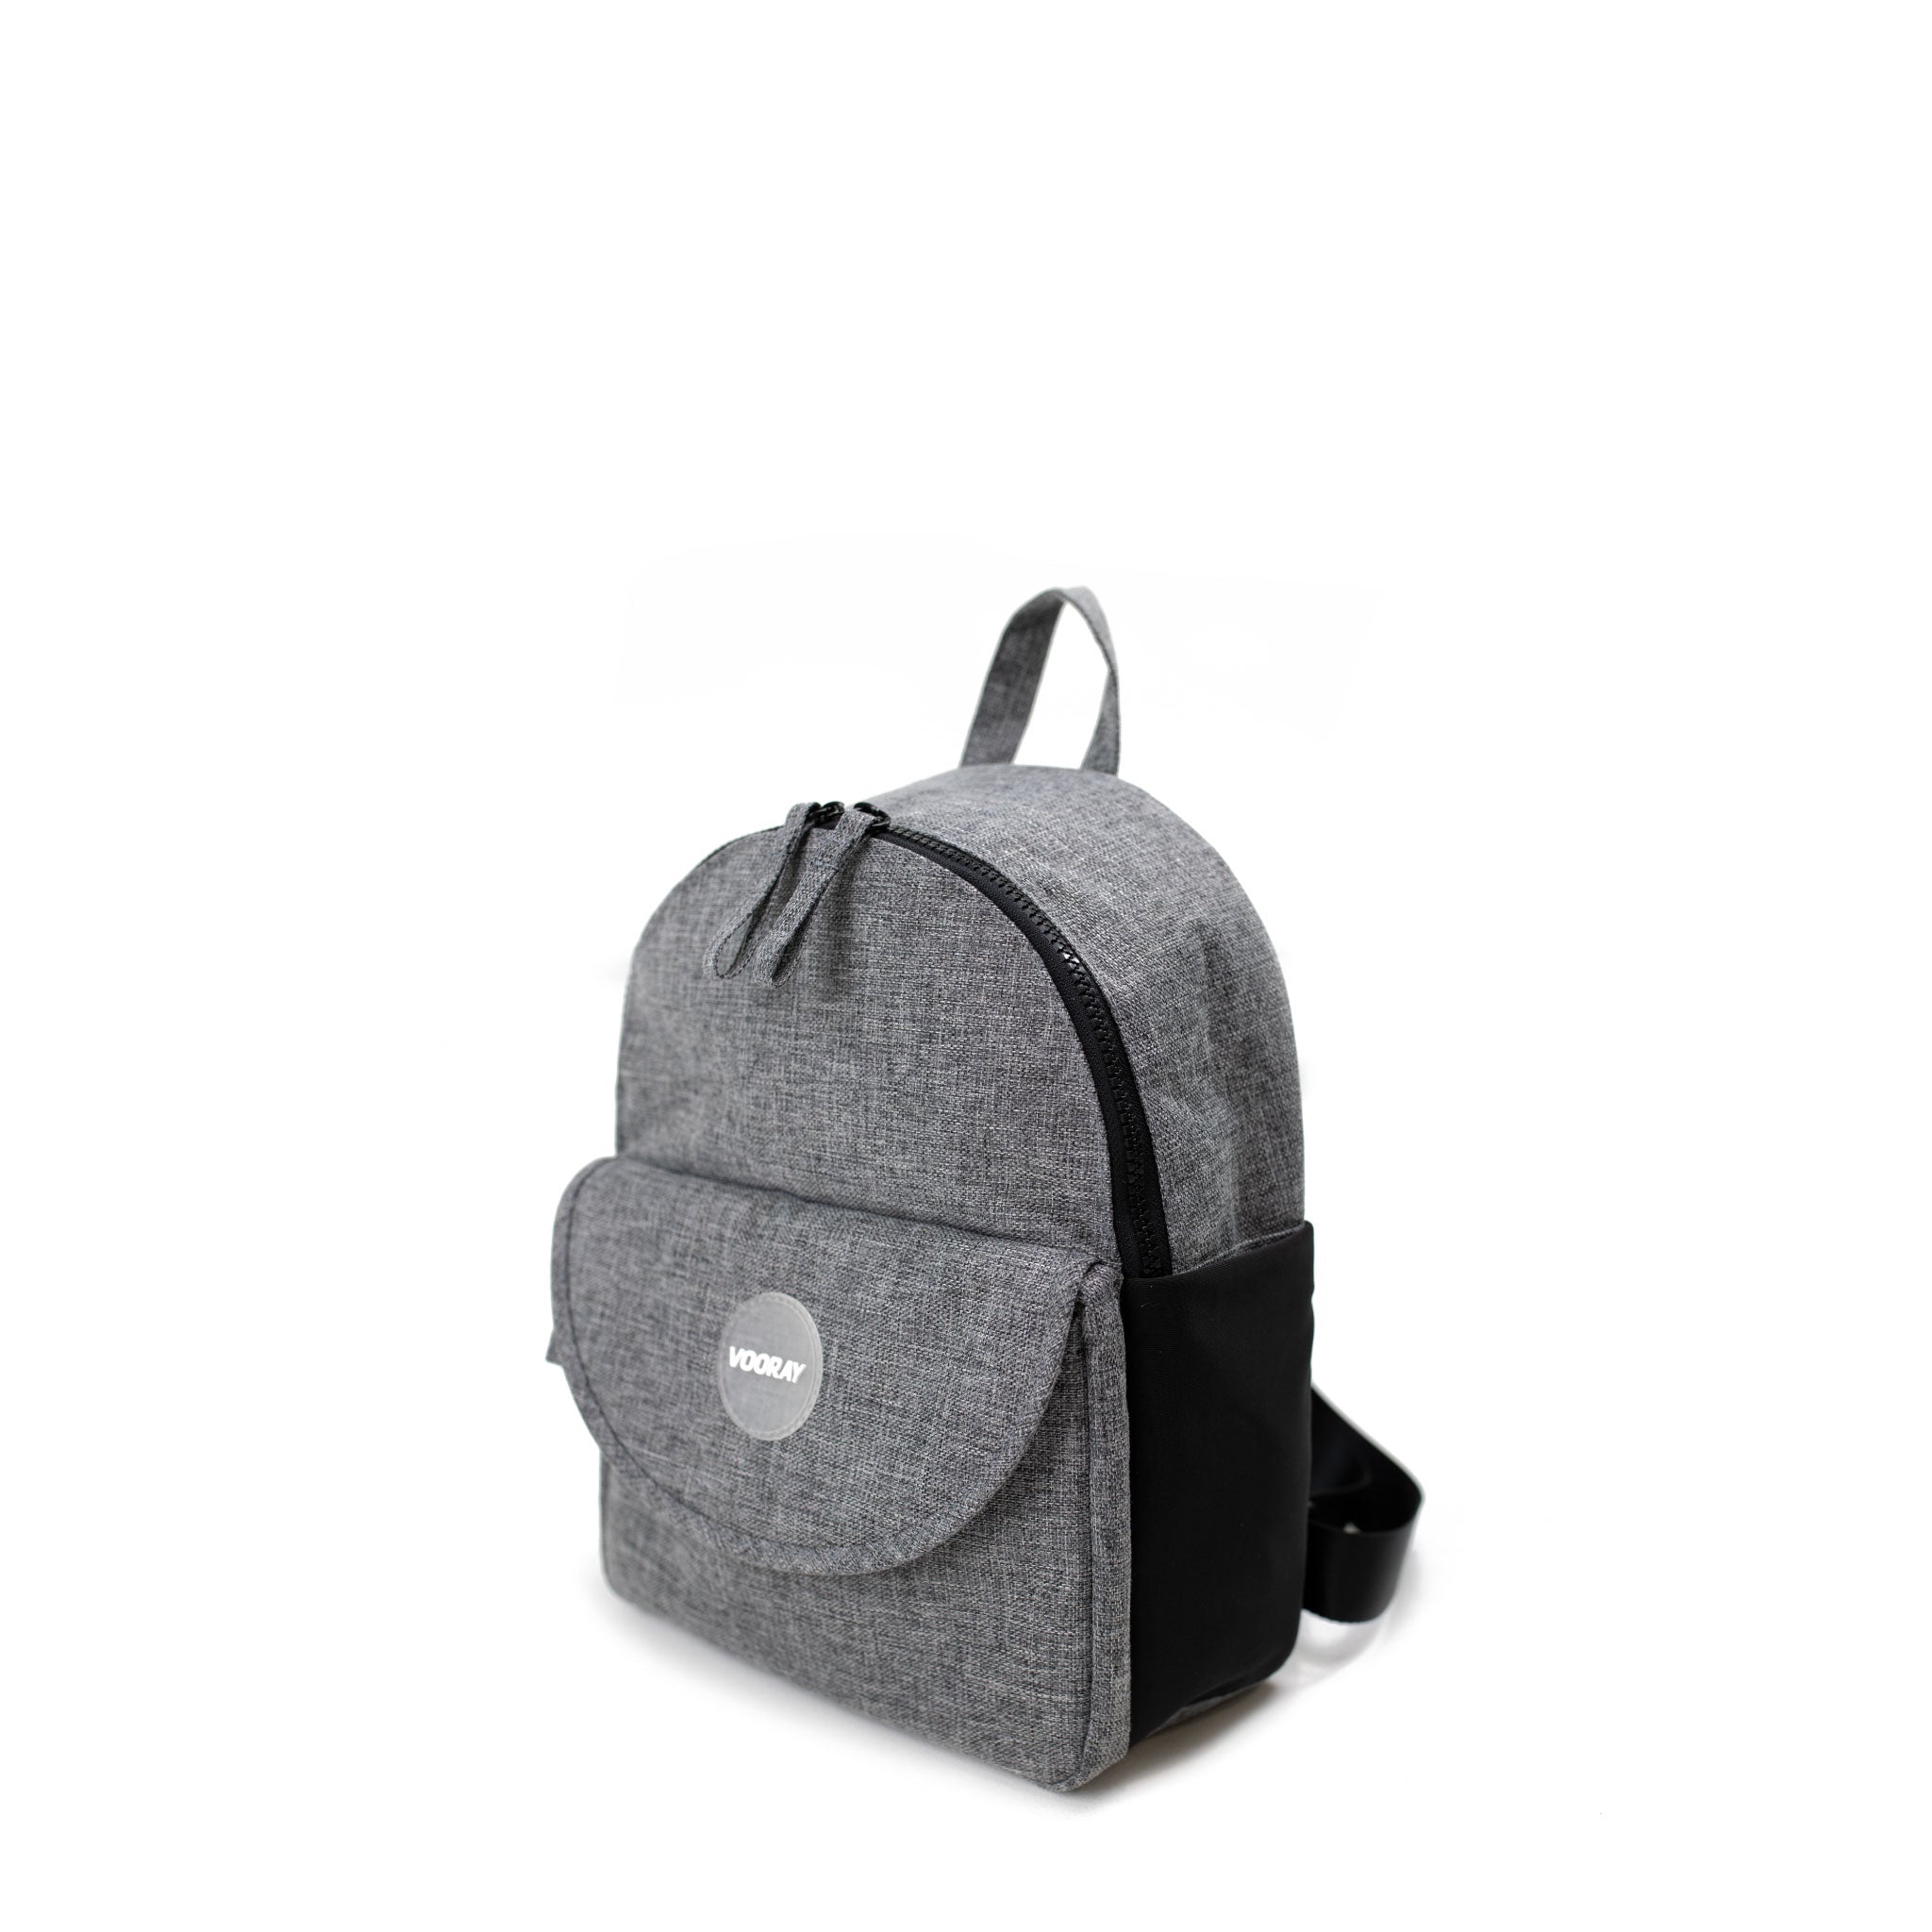 Vooray Lexi Small Backpack